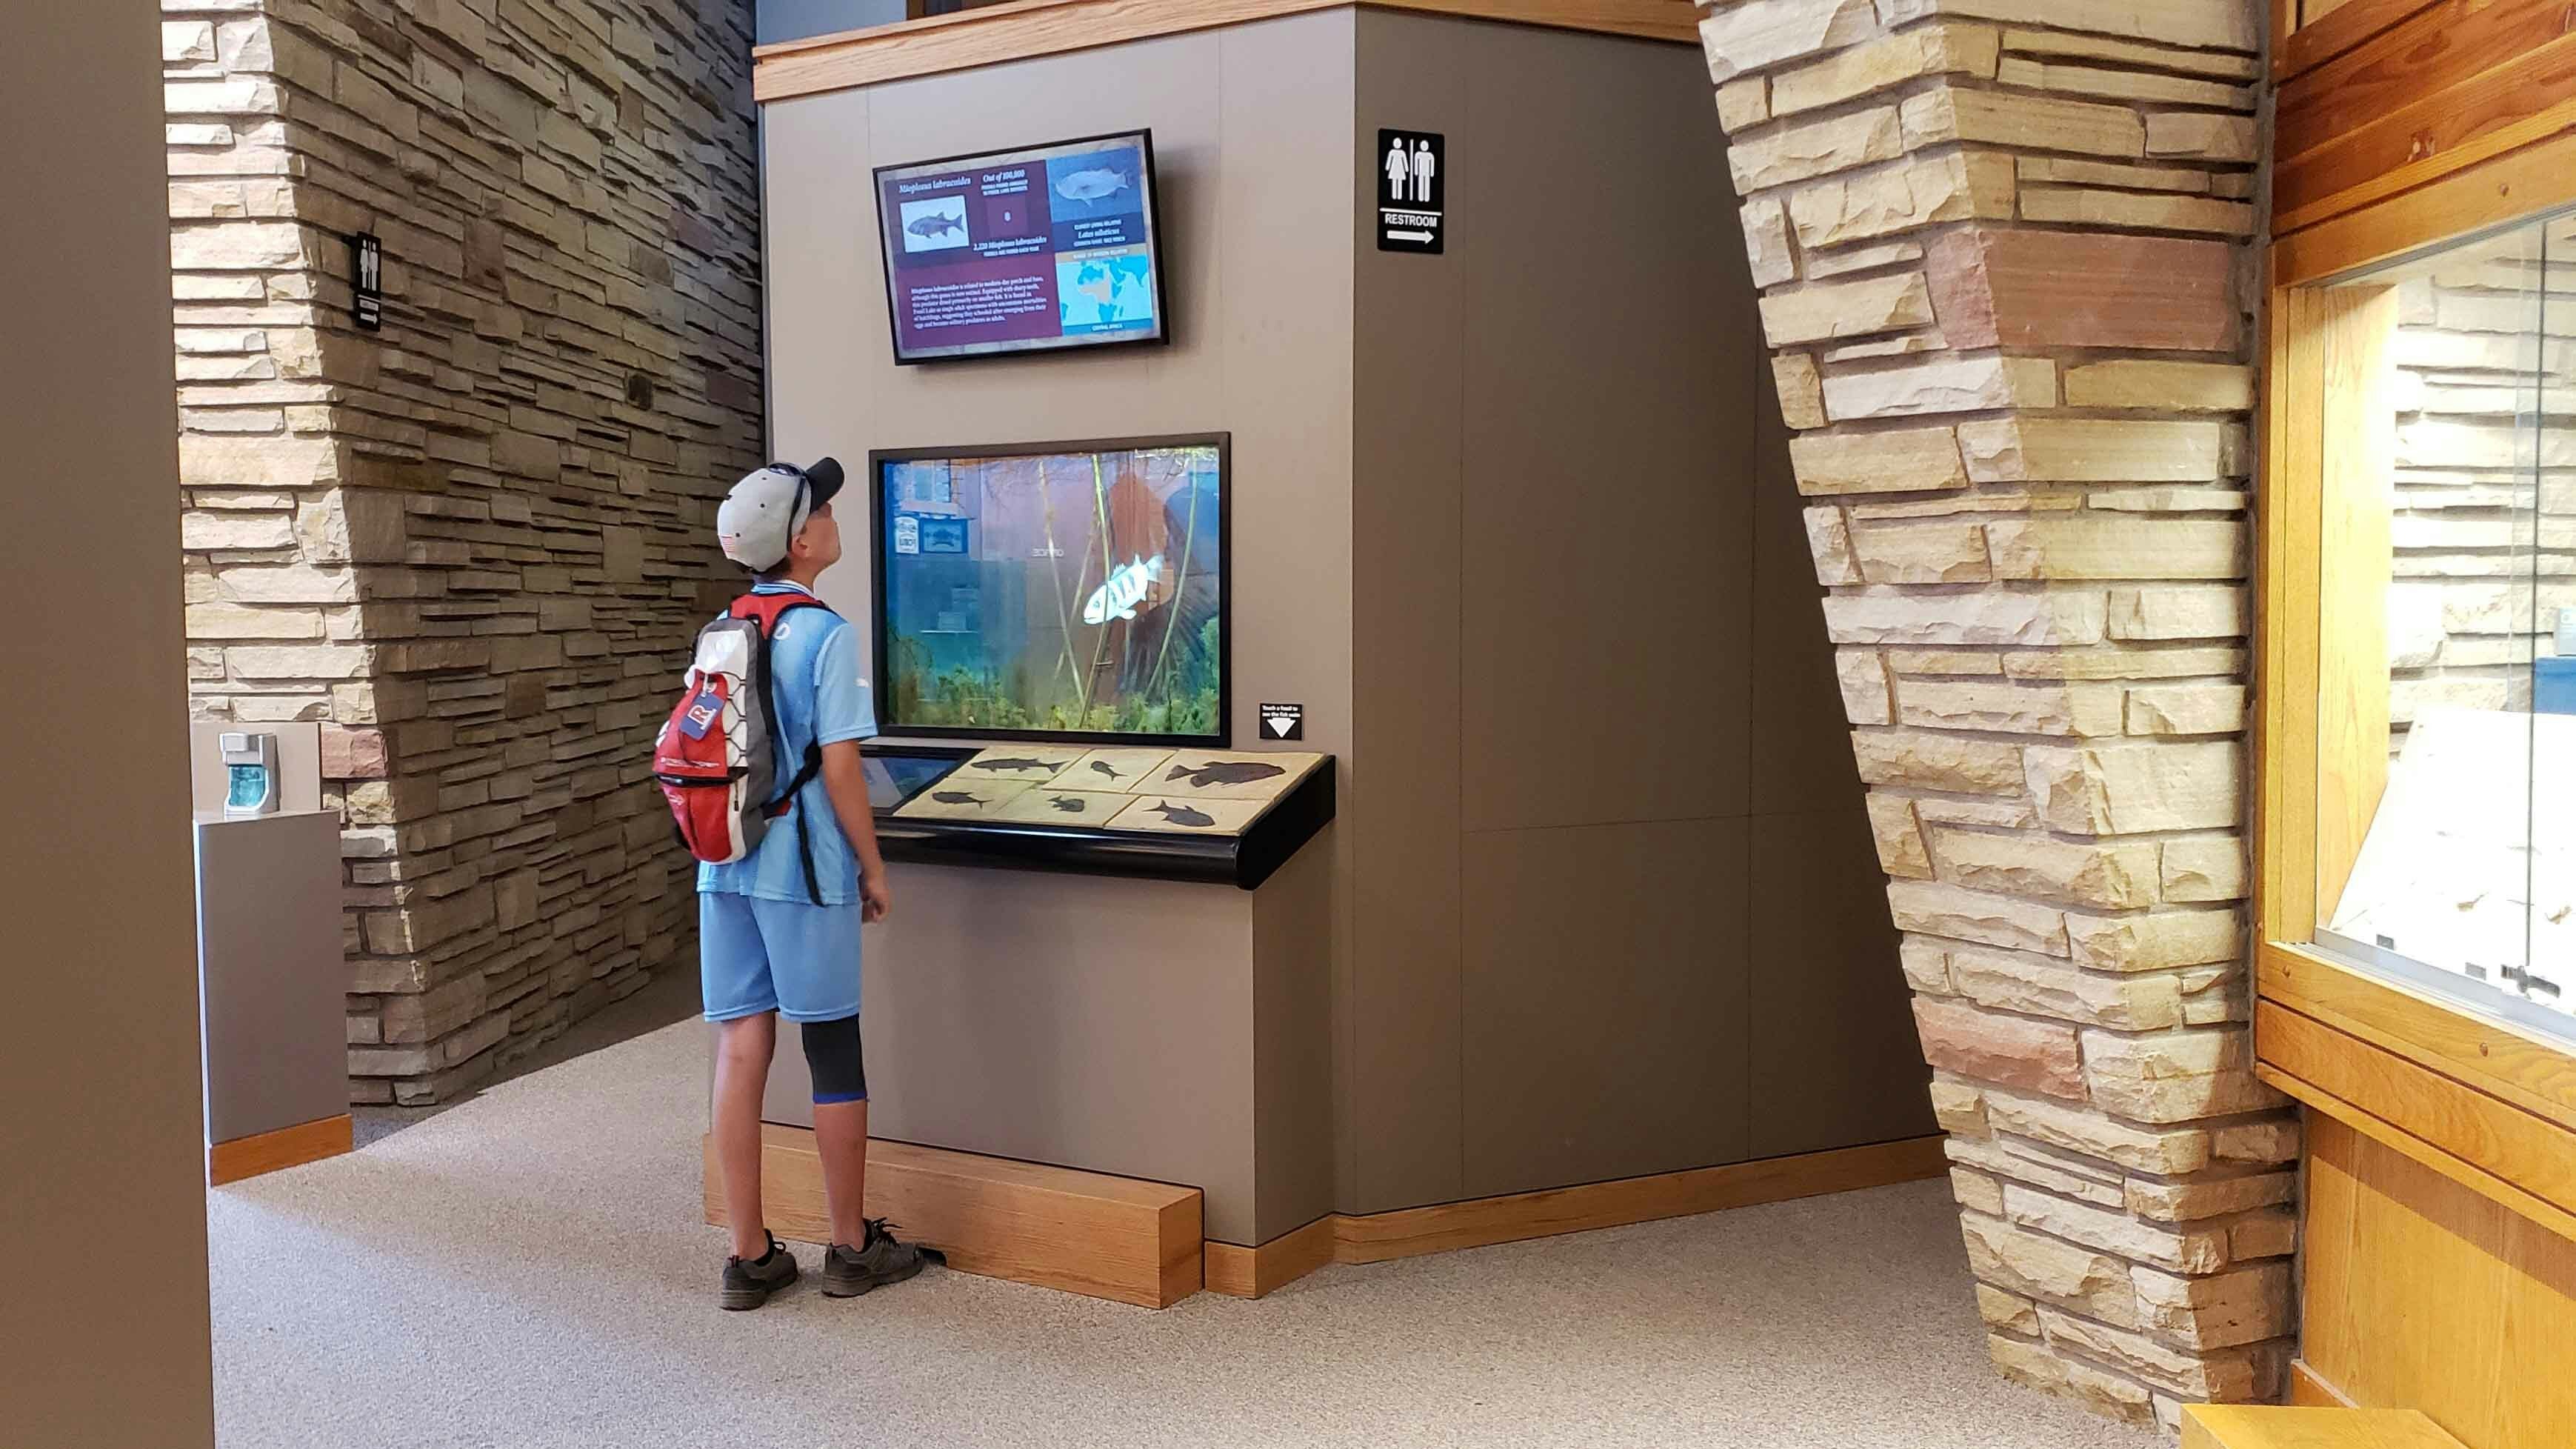 A French boy traveling with his father, watches fossil fish come back to life thanks to a virtual reality display. Chouvet's father is a French tour guide, surveying travel opportunities to share with his clients